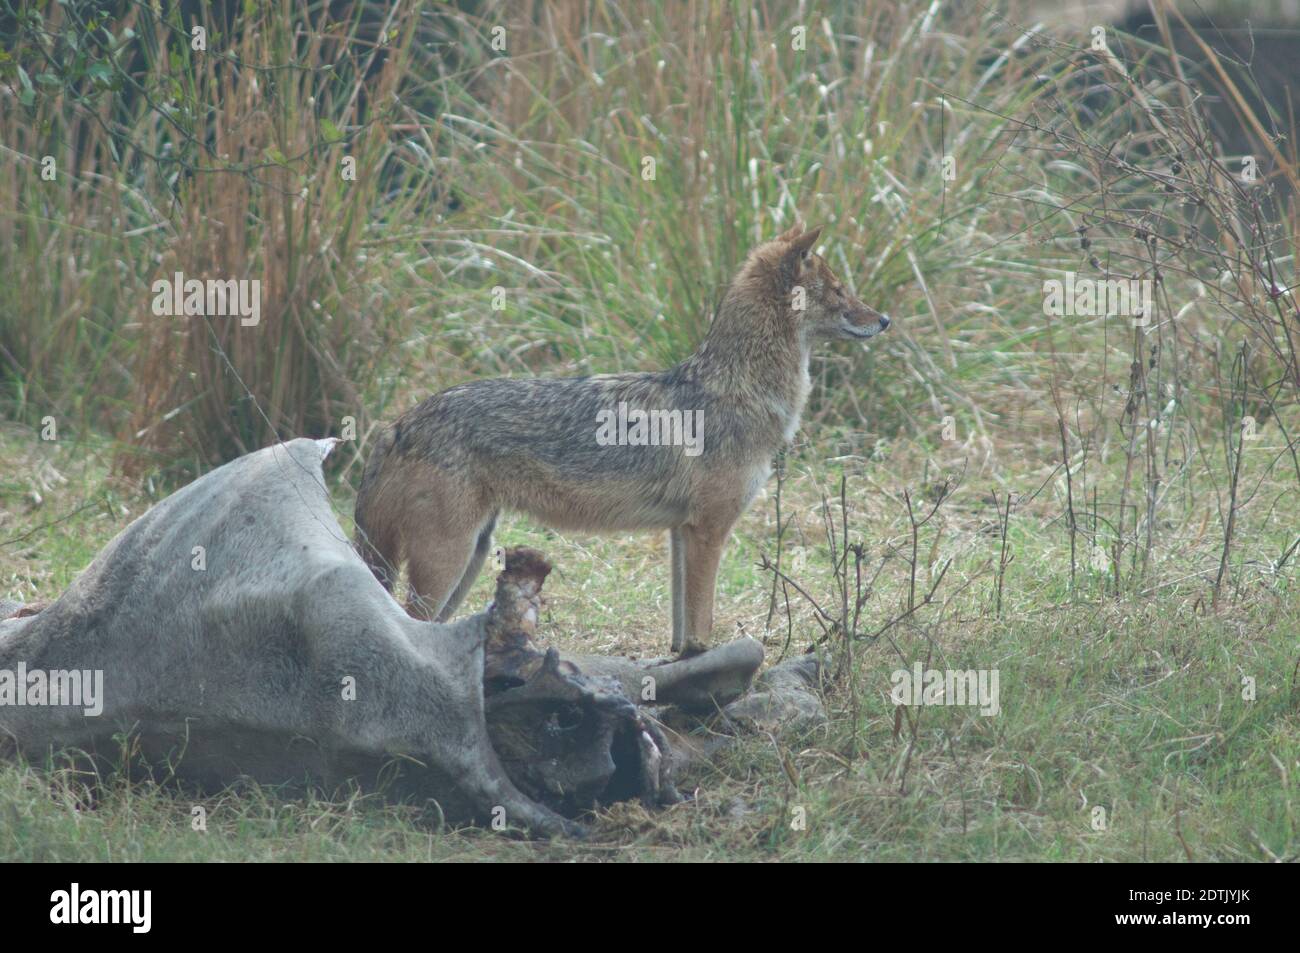 Il jackal d'oro Canis aureus indica accanto ad uno zebù morto. Parco Nazionale Keoladeo Ghana. Bharatpur. Rajasthan. India. Foto Stock